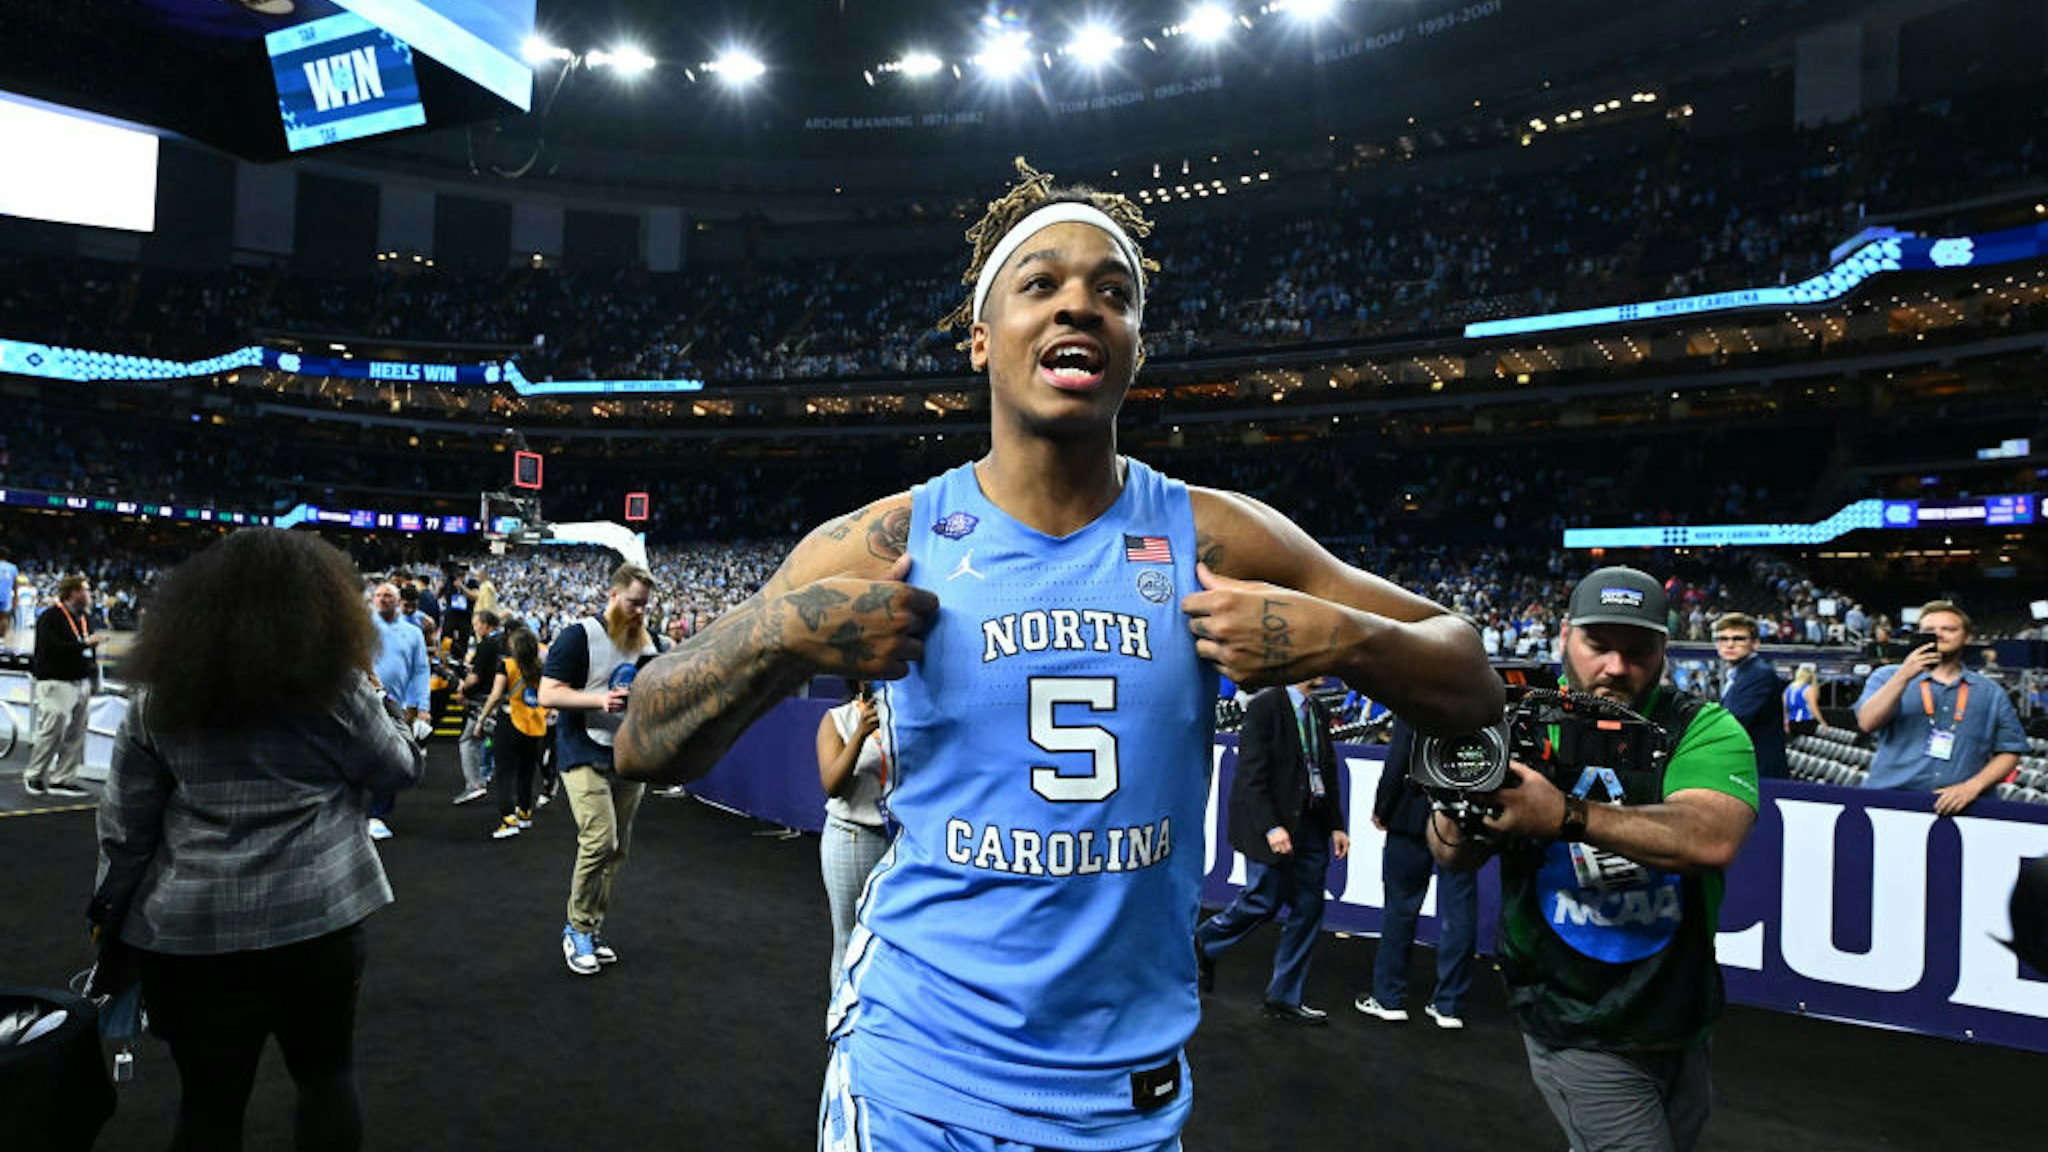 NEW ORLEANS, LOUISIANA - APRIL 02: Armando Bacot #5 of the North Carolina Tar Heels celebrates a win against the Duke Blue Devils during the second half in the semifinal game of the 2022 NCAA Men's Basketball Tournament Final Four at Caesars Superdome on April 02, 2022 in New Orleans, Louisiana. (Photo by Brett Wilhelm/NCAA Photos via Getty Images)